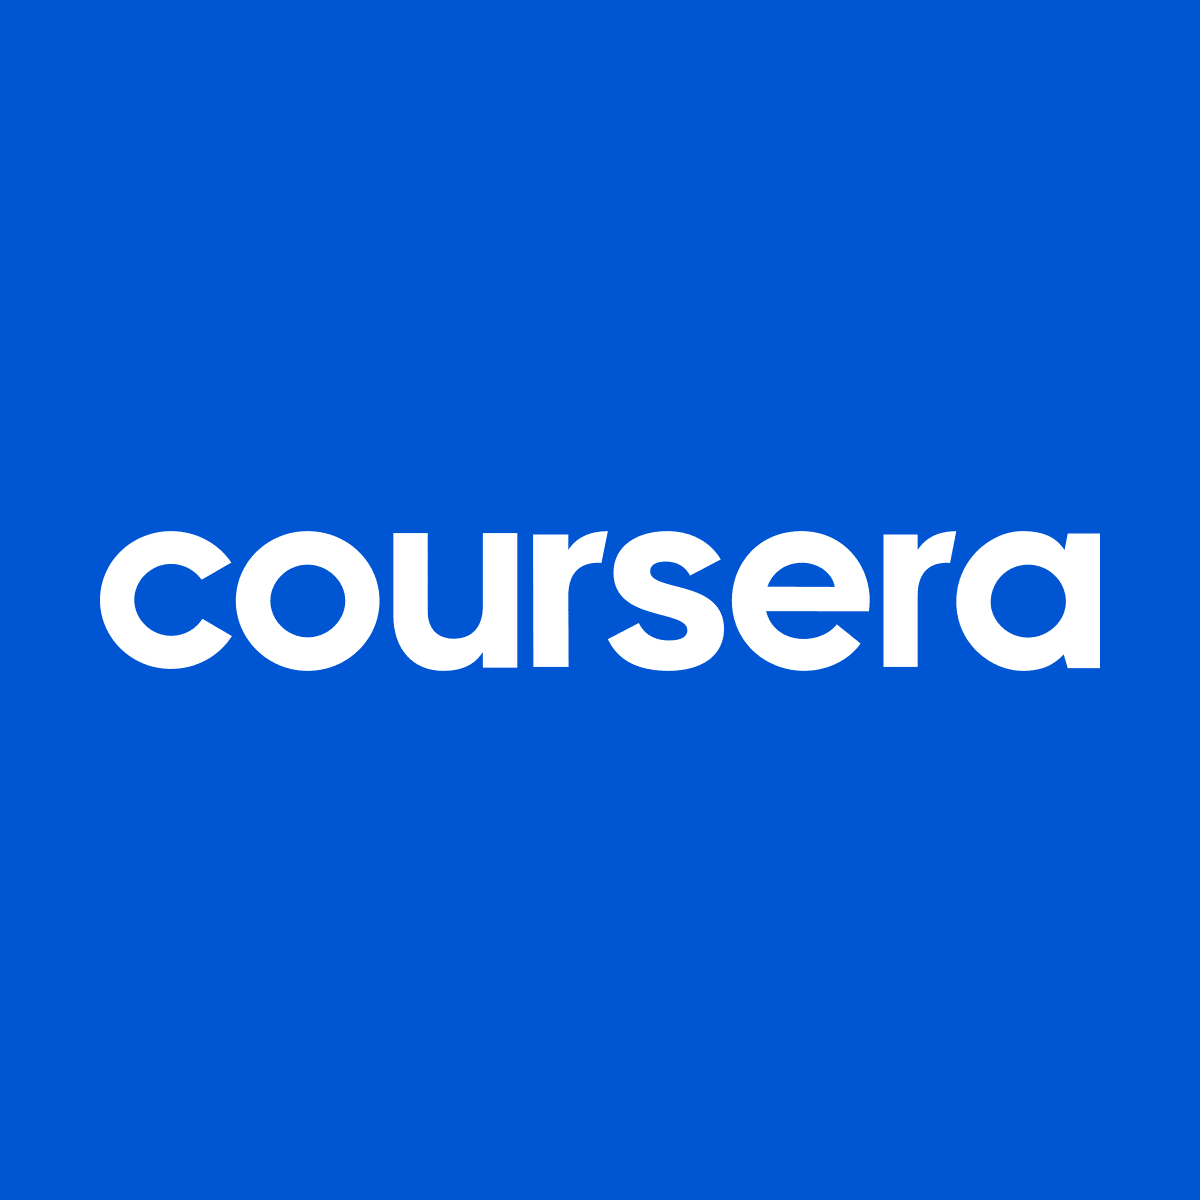 African-Bitcoiners_Learning_Resources_Coursera-logo